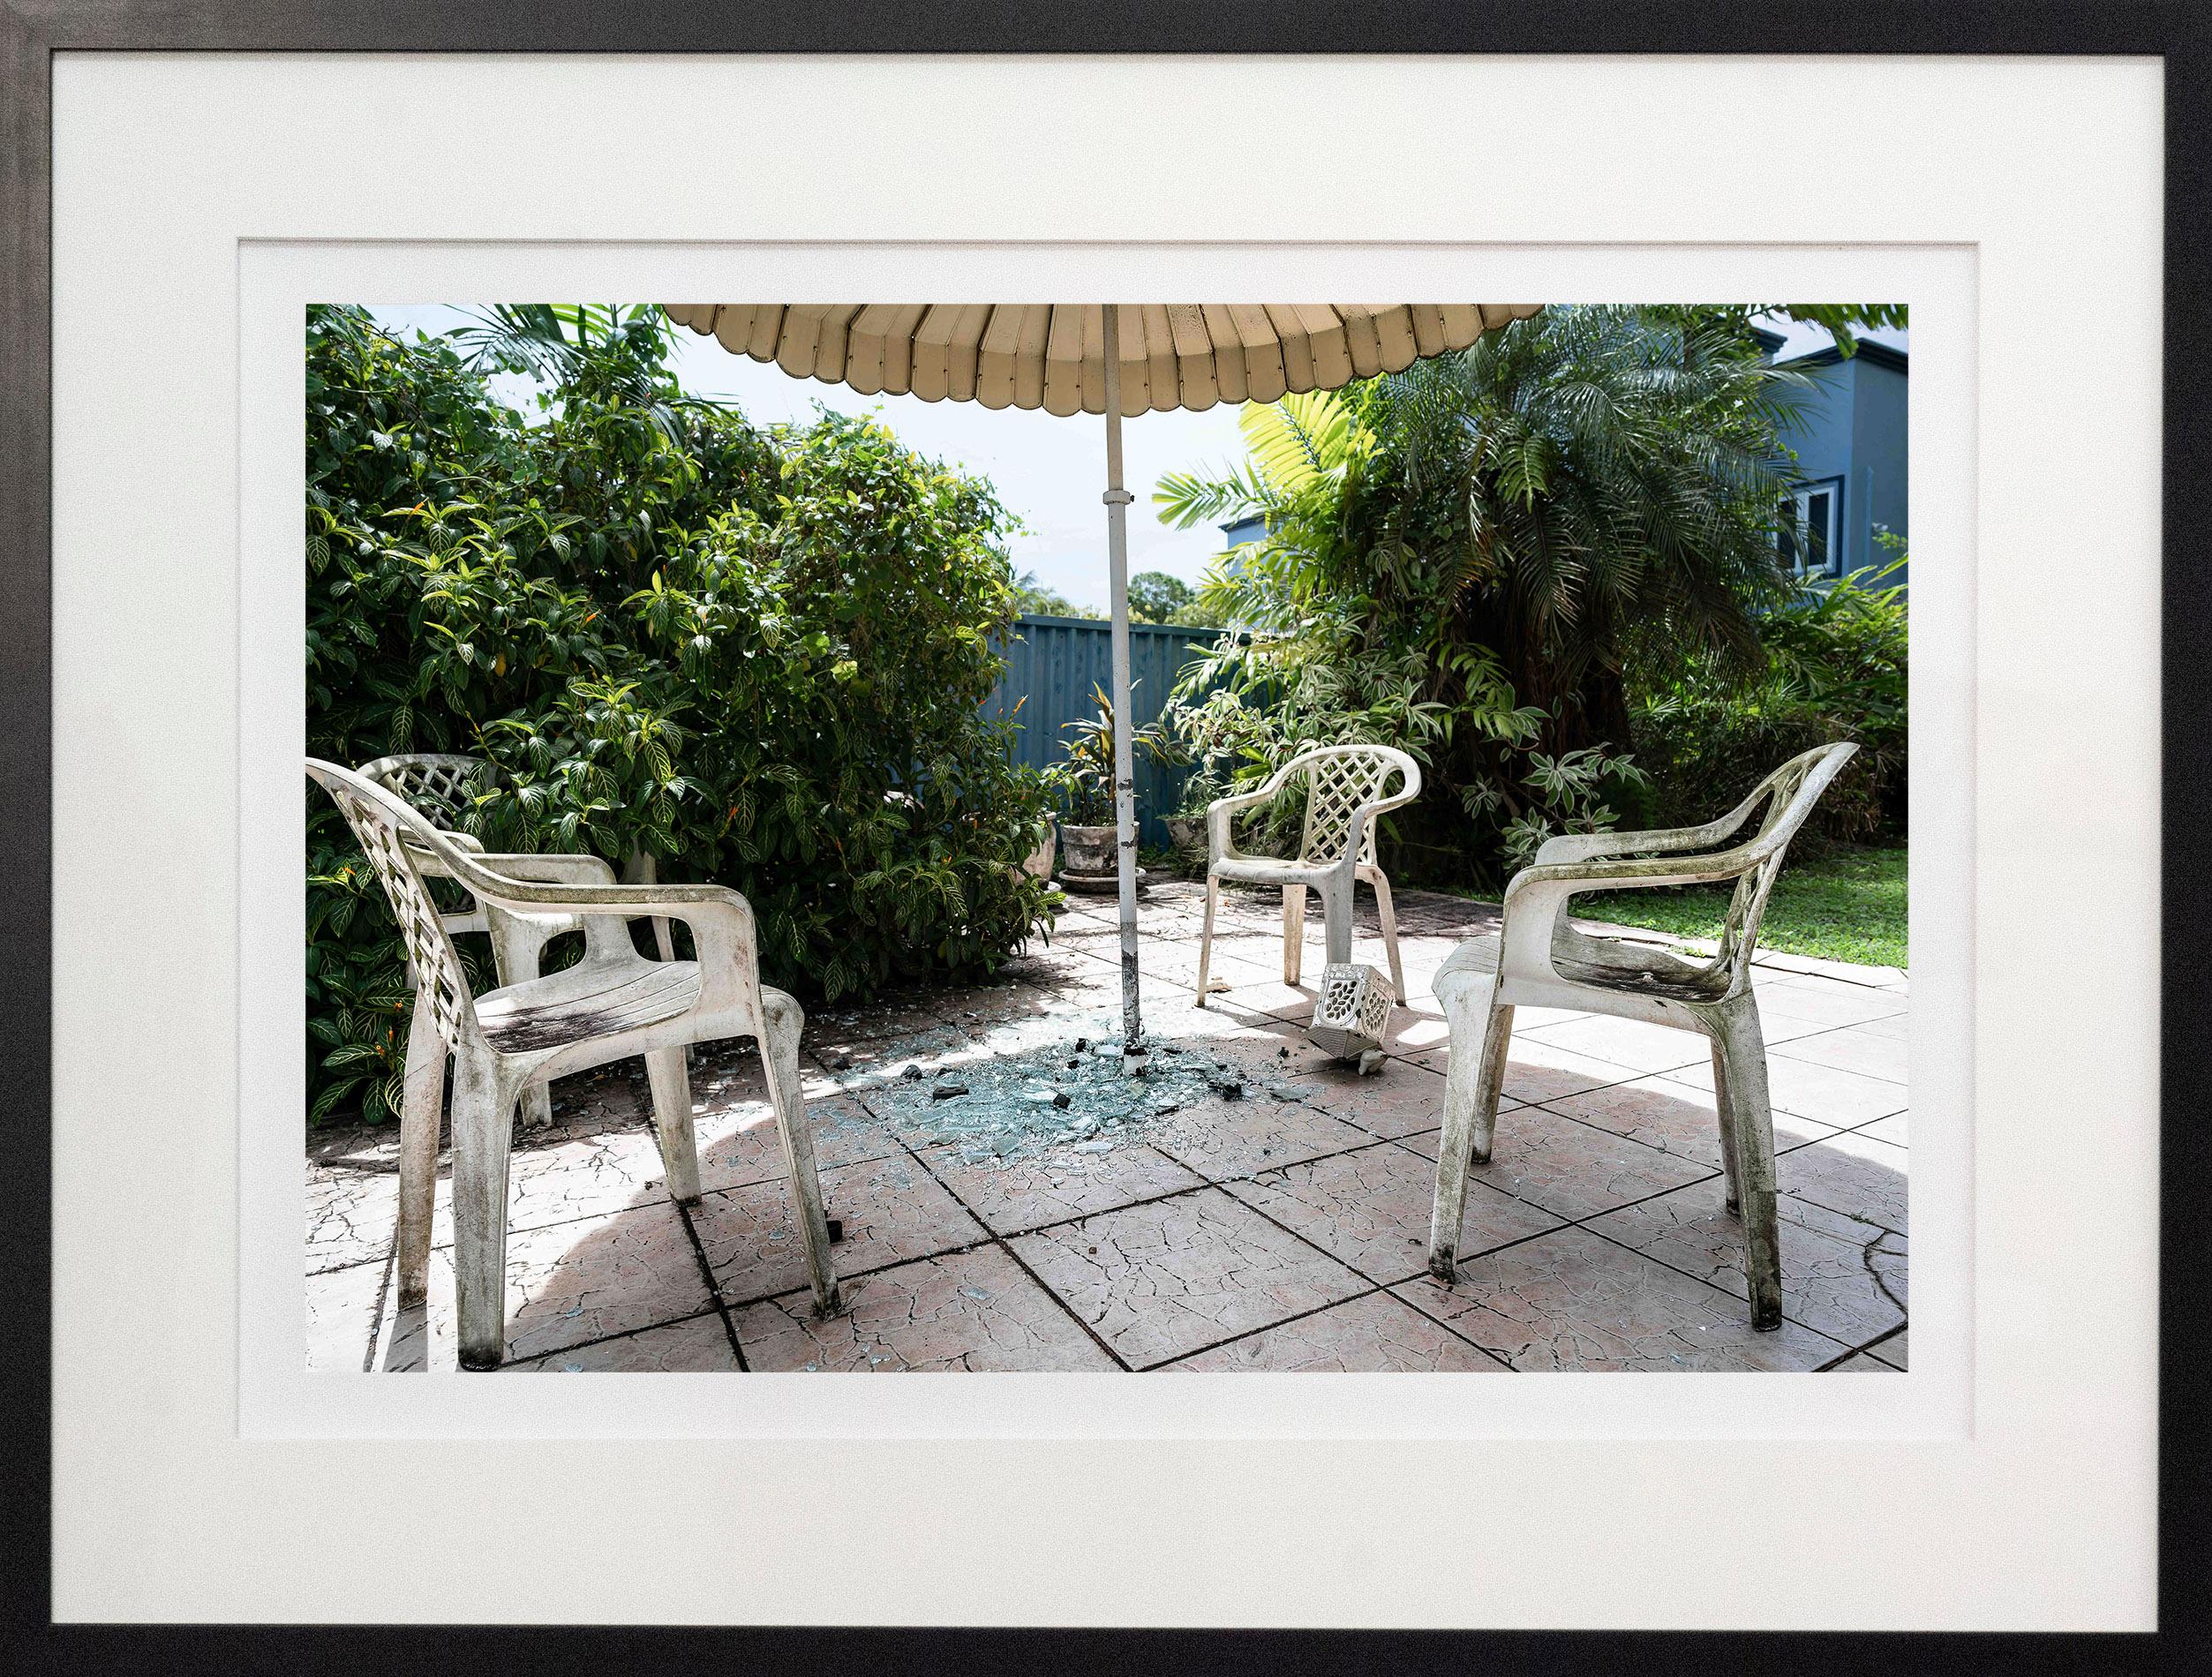 Patio 1/8 - detailed, documentary, exterior, color, photography, giclée print - Photograph by Shani Mootoo